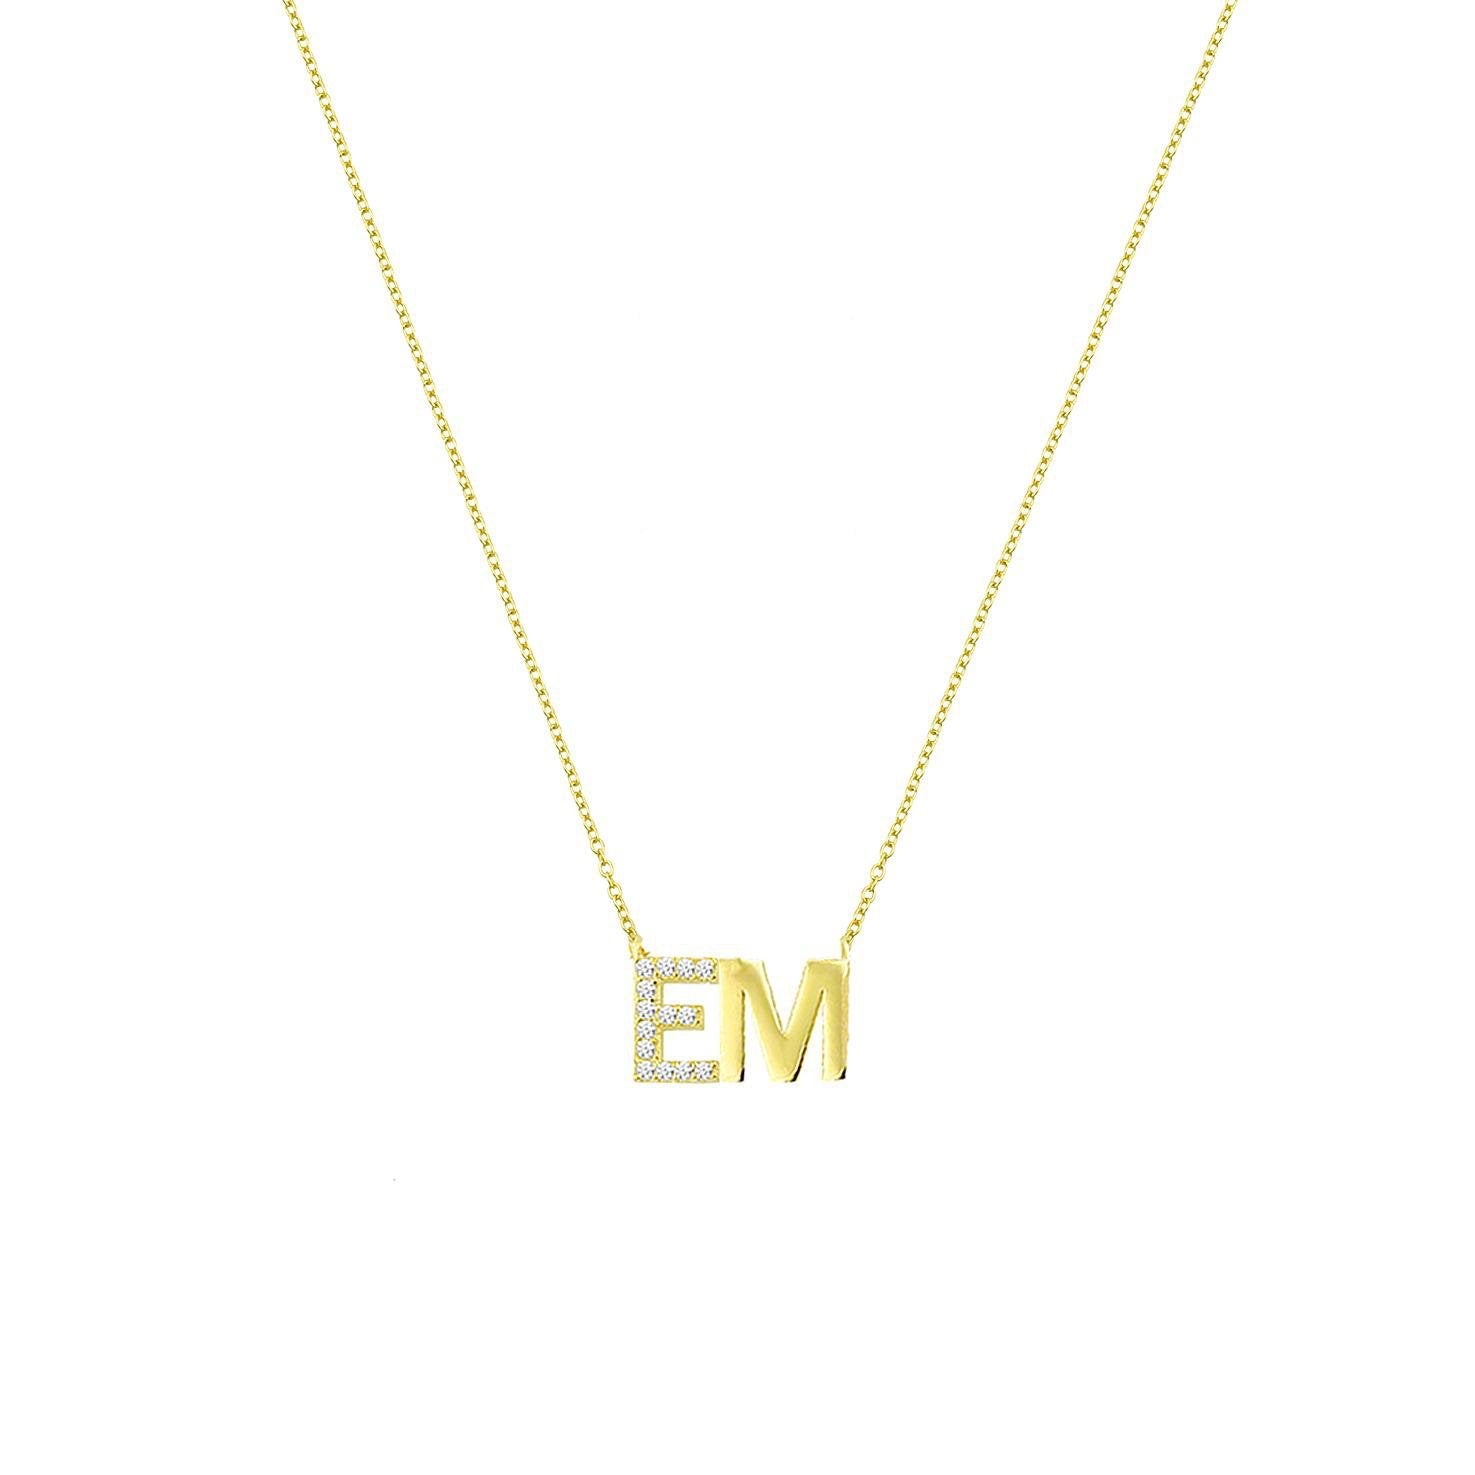 Custom Classic Initials Necklace with Crystal Detail JEWELRY The Sis Kiss Gold and Crystals